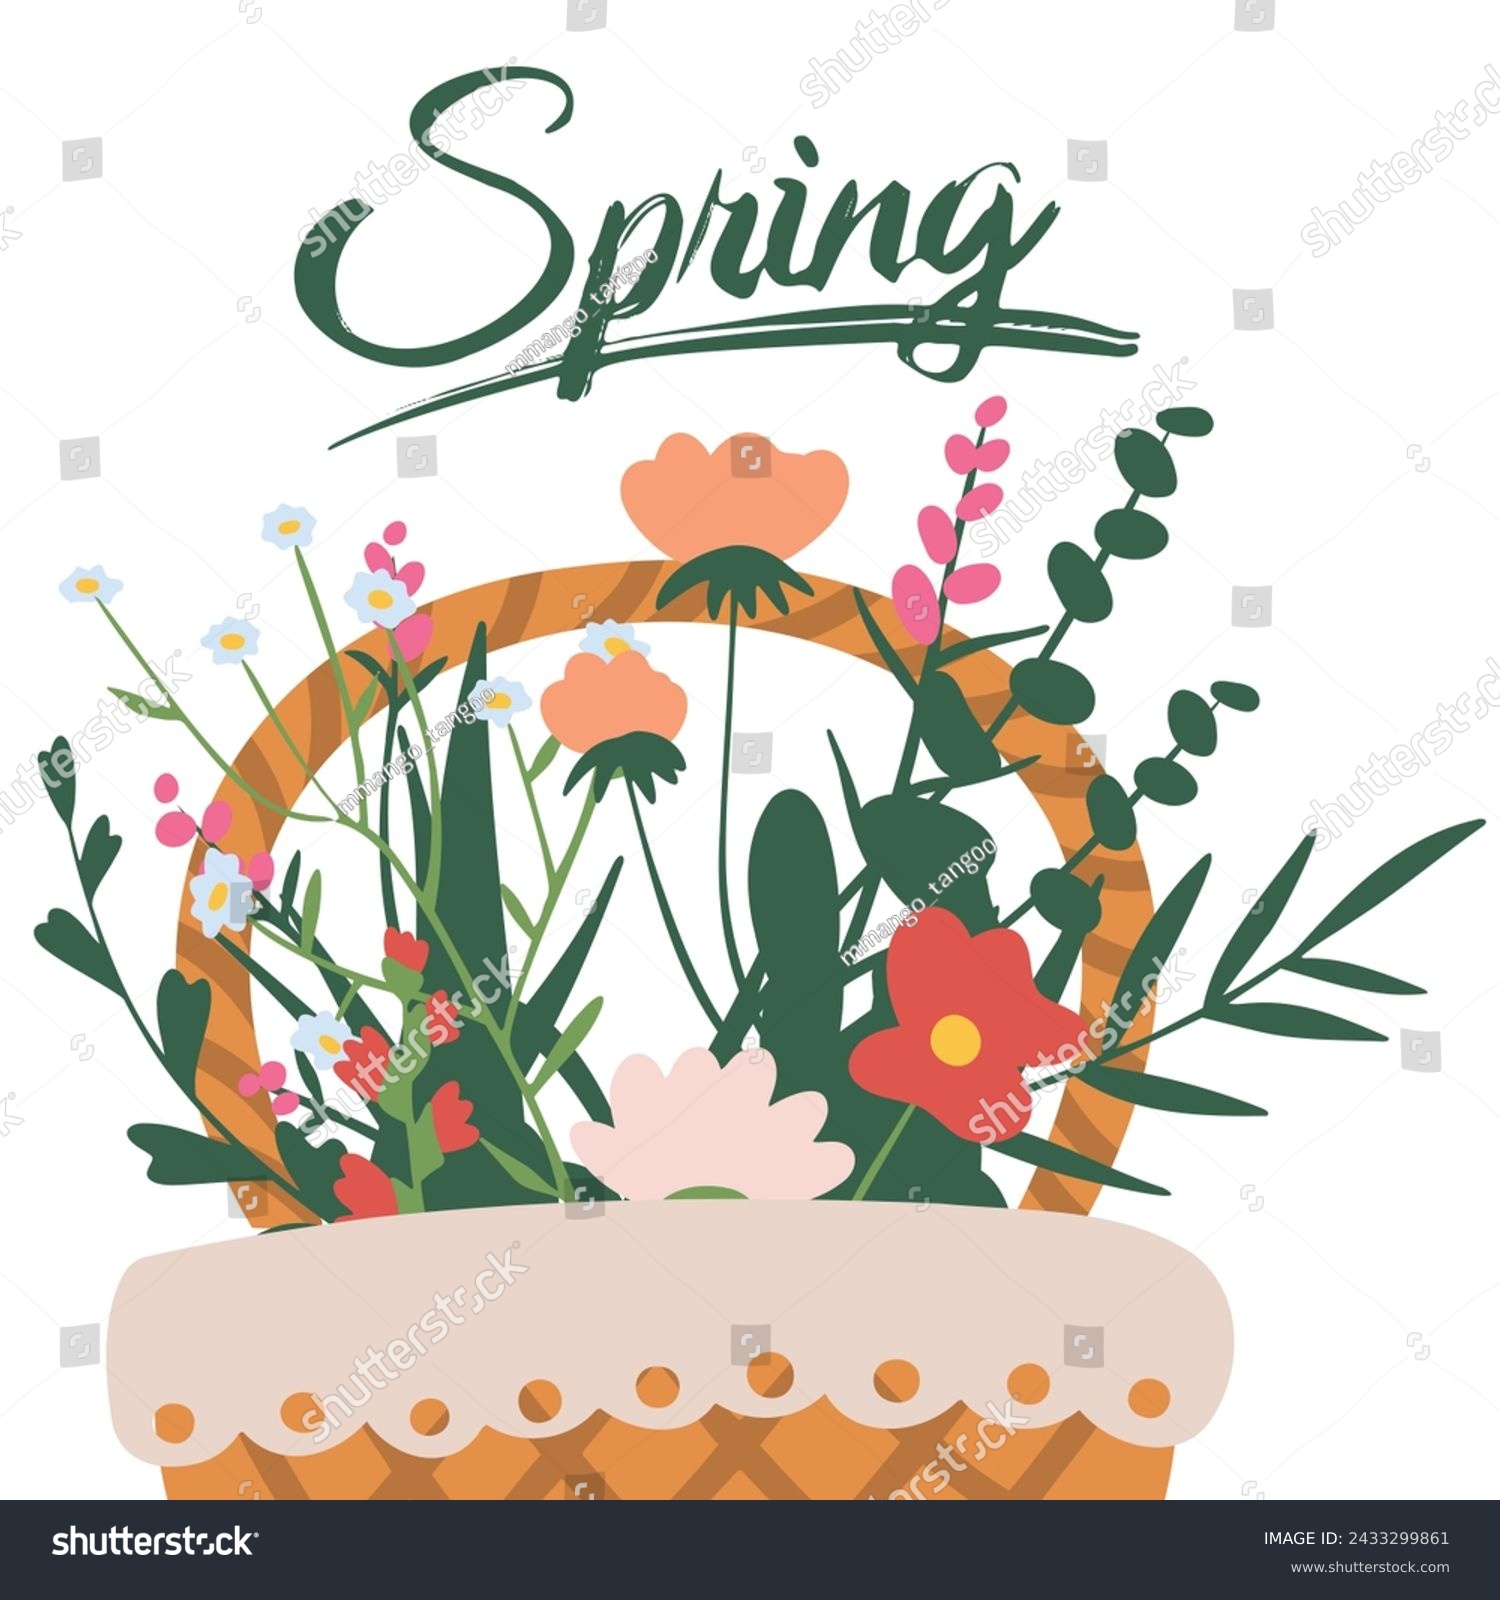 Spring card with typography and flower illustrations. Hello spring card with decorative floral frame, vector illustration, decorative florid background with copy space #2433299861